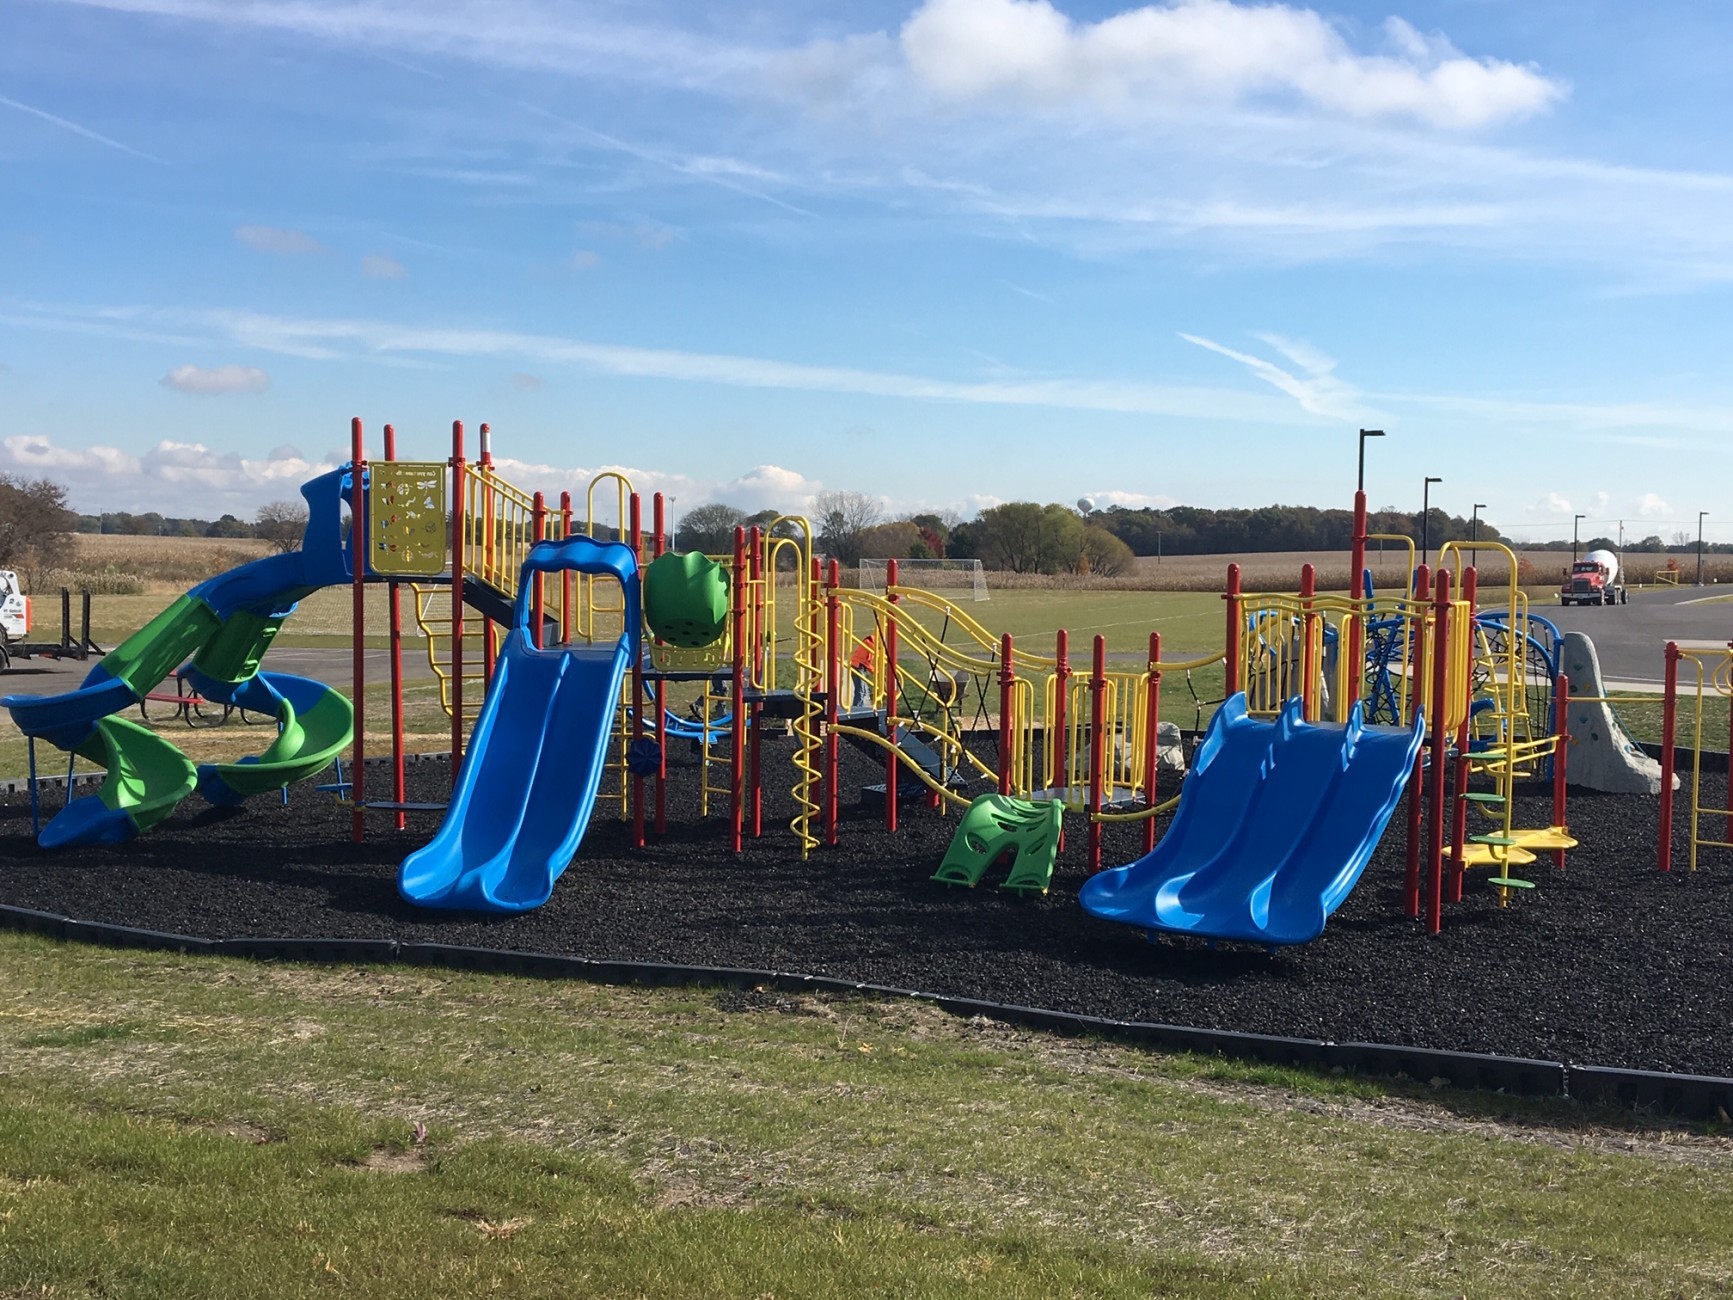 Featured image of blue red and yellow colored playground park with several blue slides